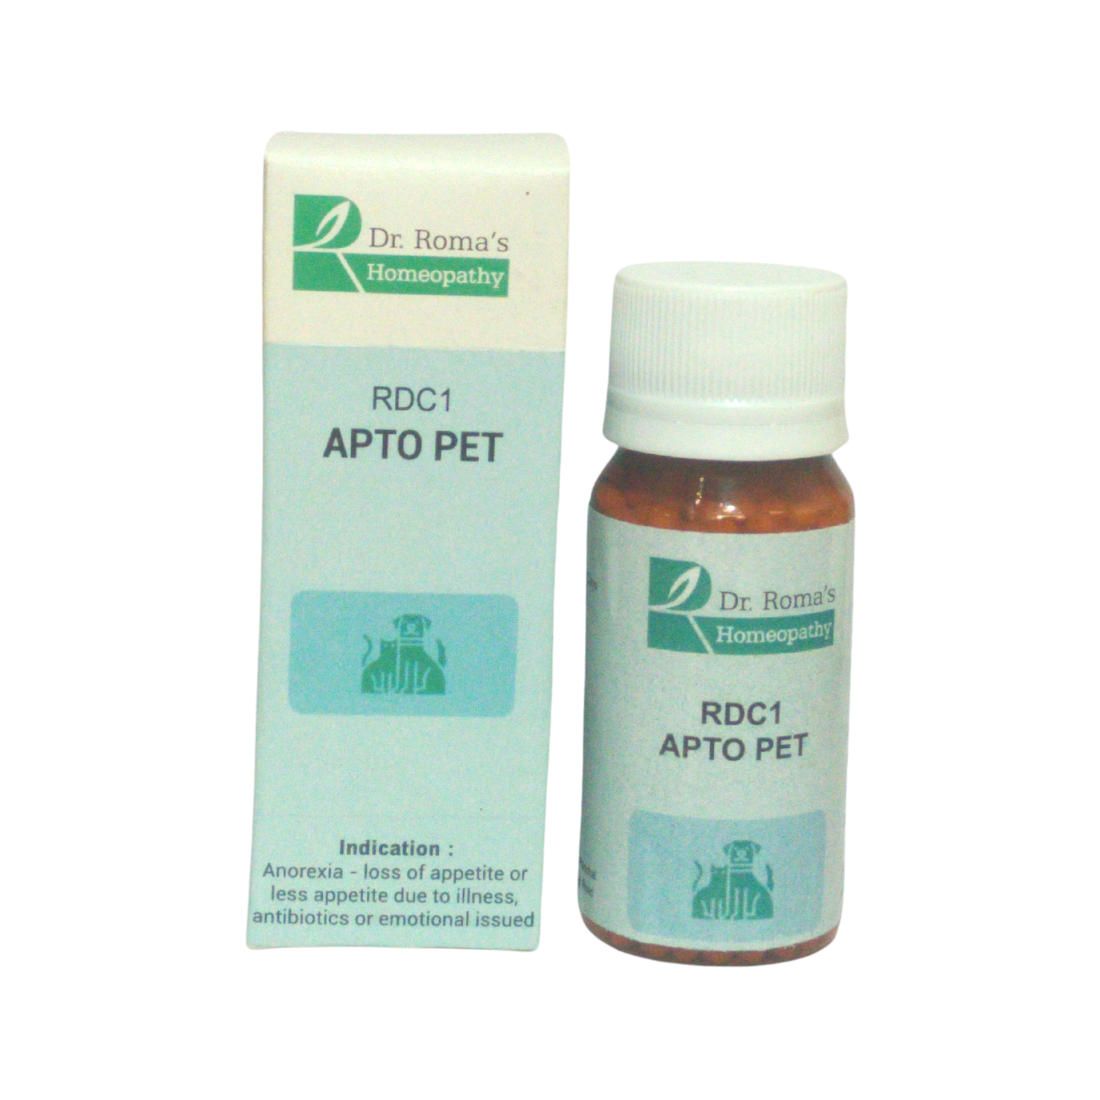 APTO PET - For Anorexia - LOSS OF APPETITE - RDC 1